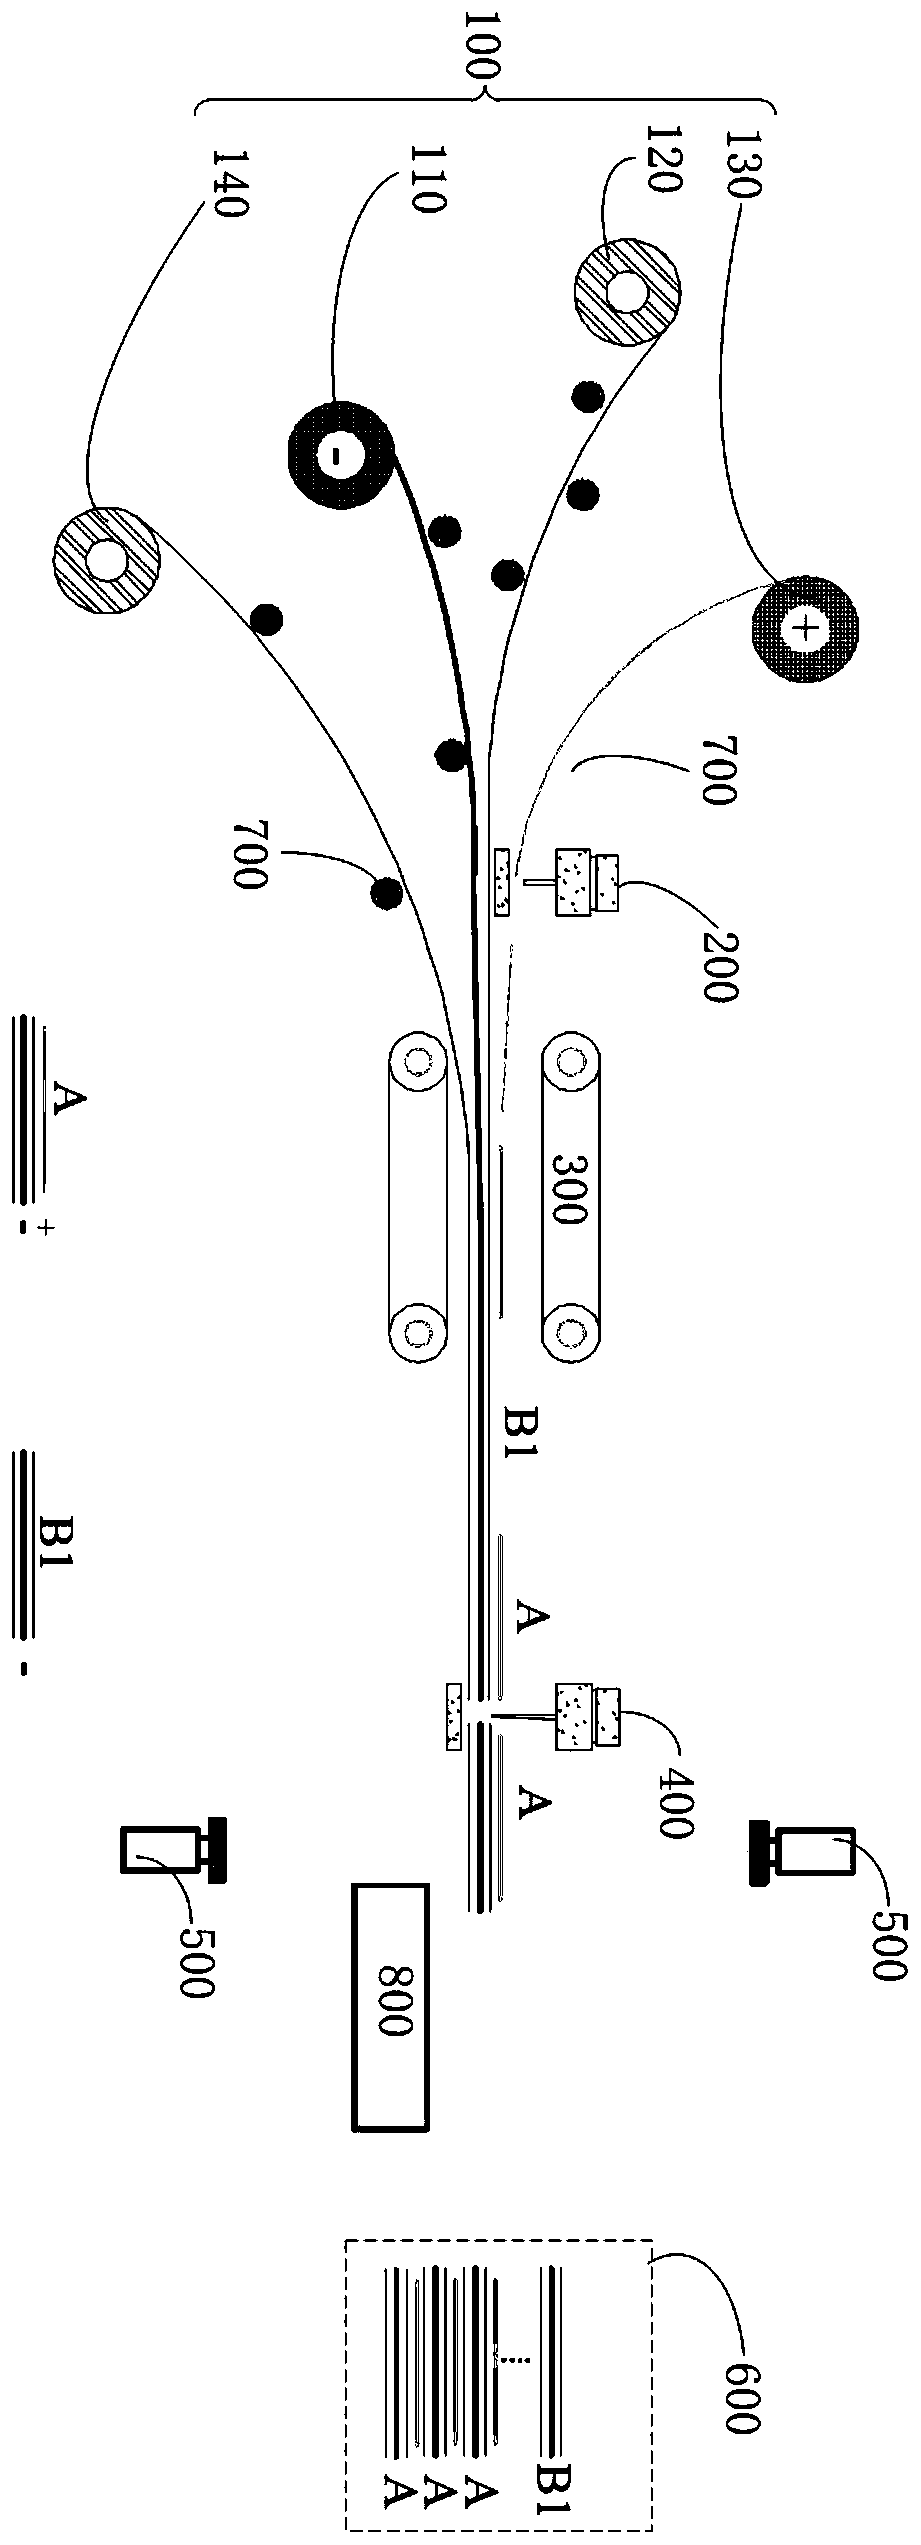 Die cutting lamination system and method